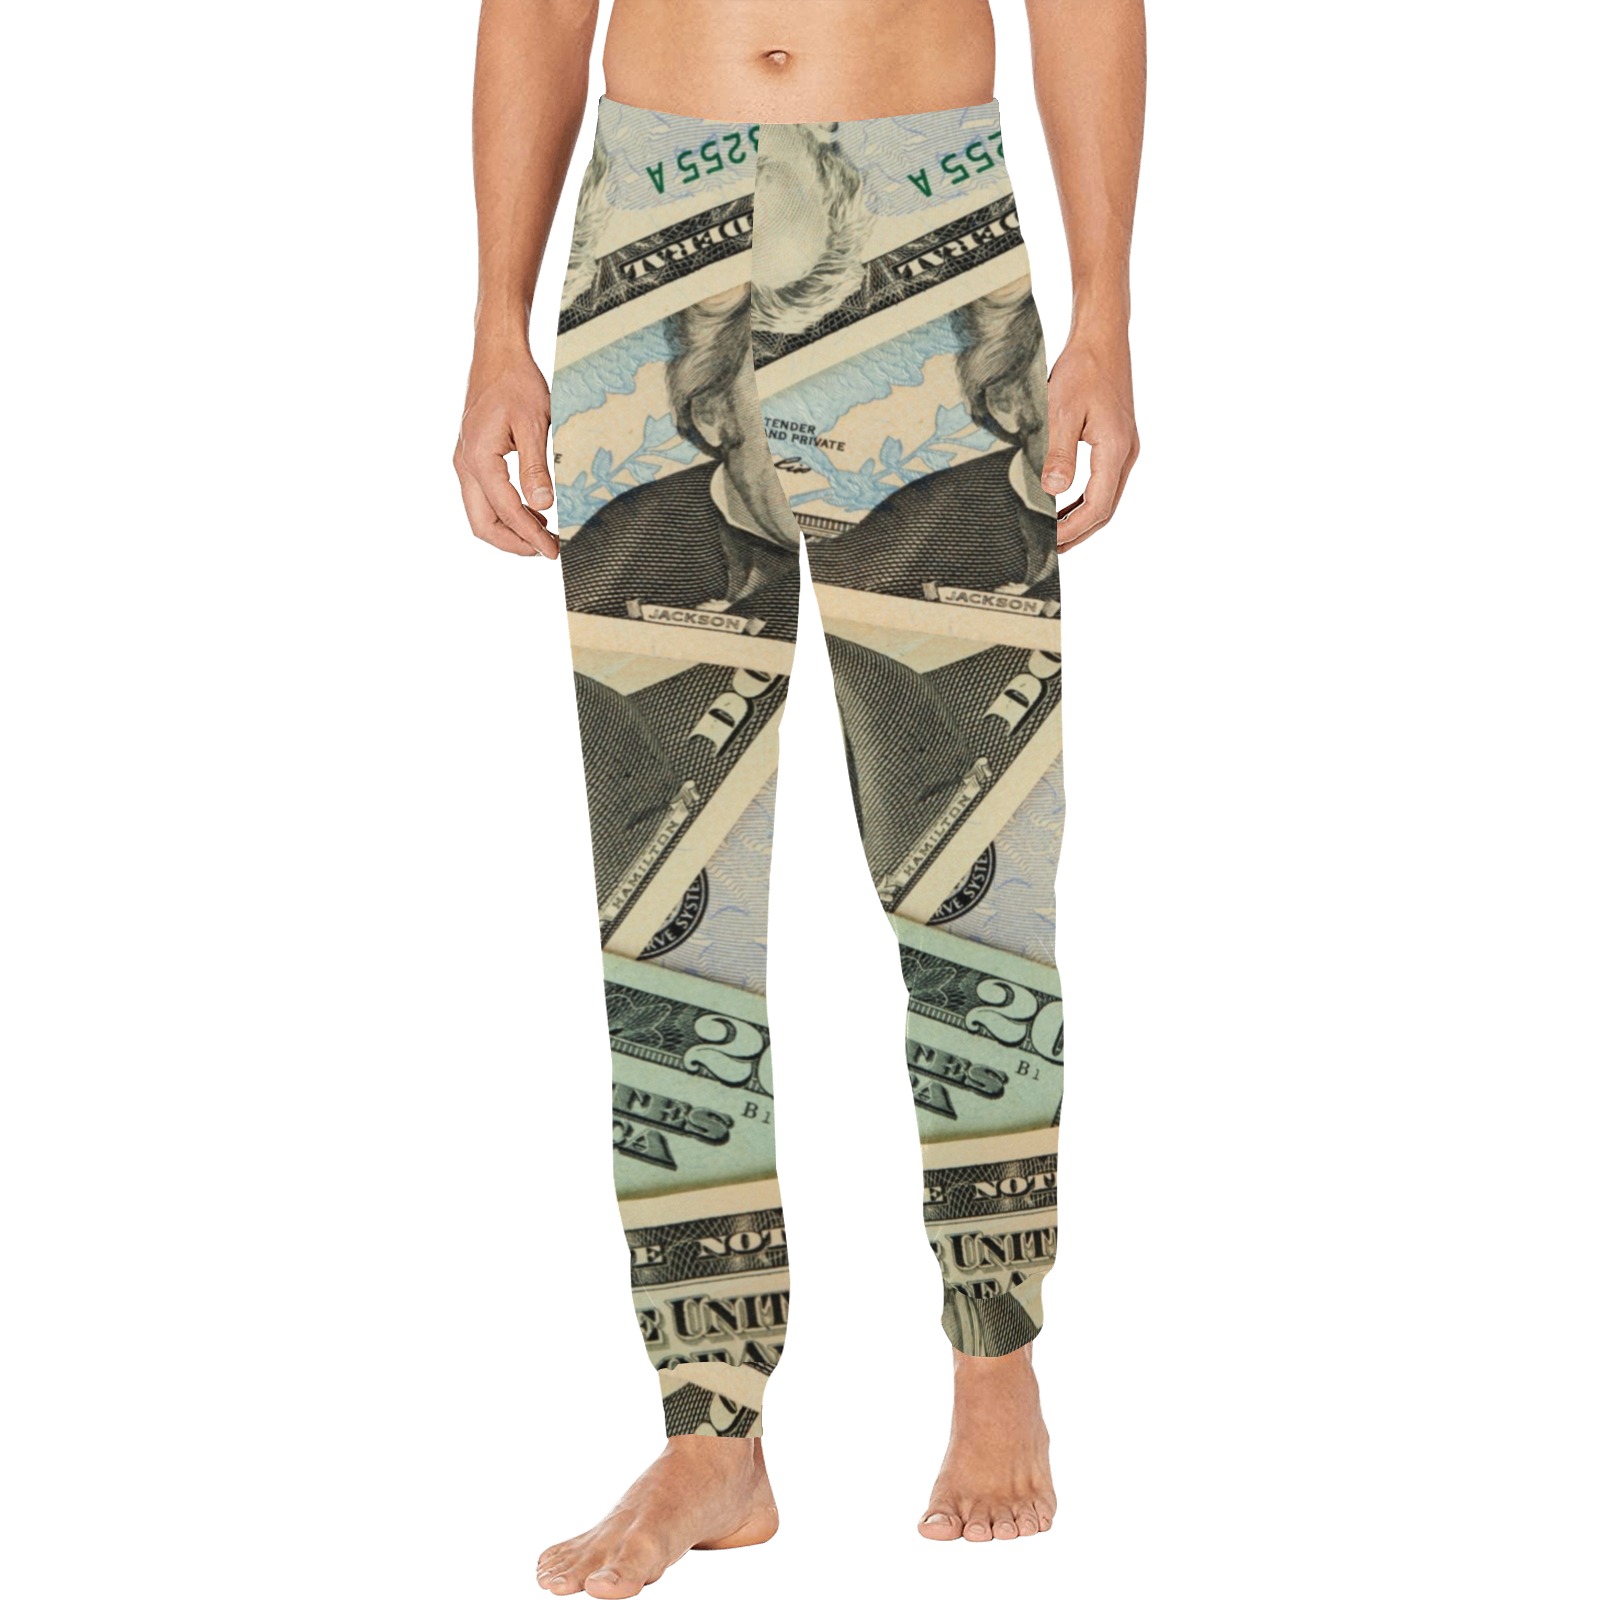 US PAPER CURRENCY Men's Pajama Trousers with Custom Cuff